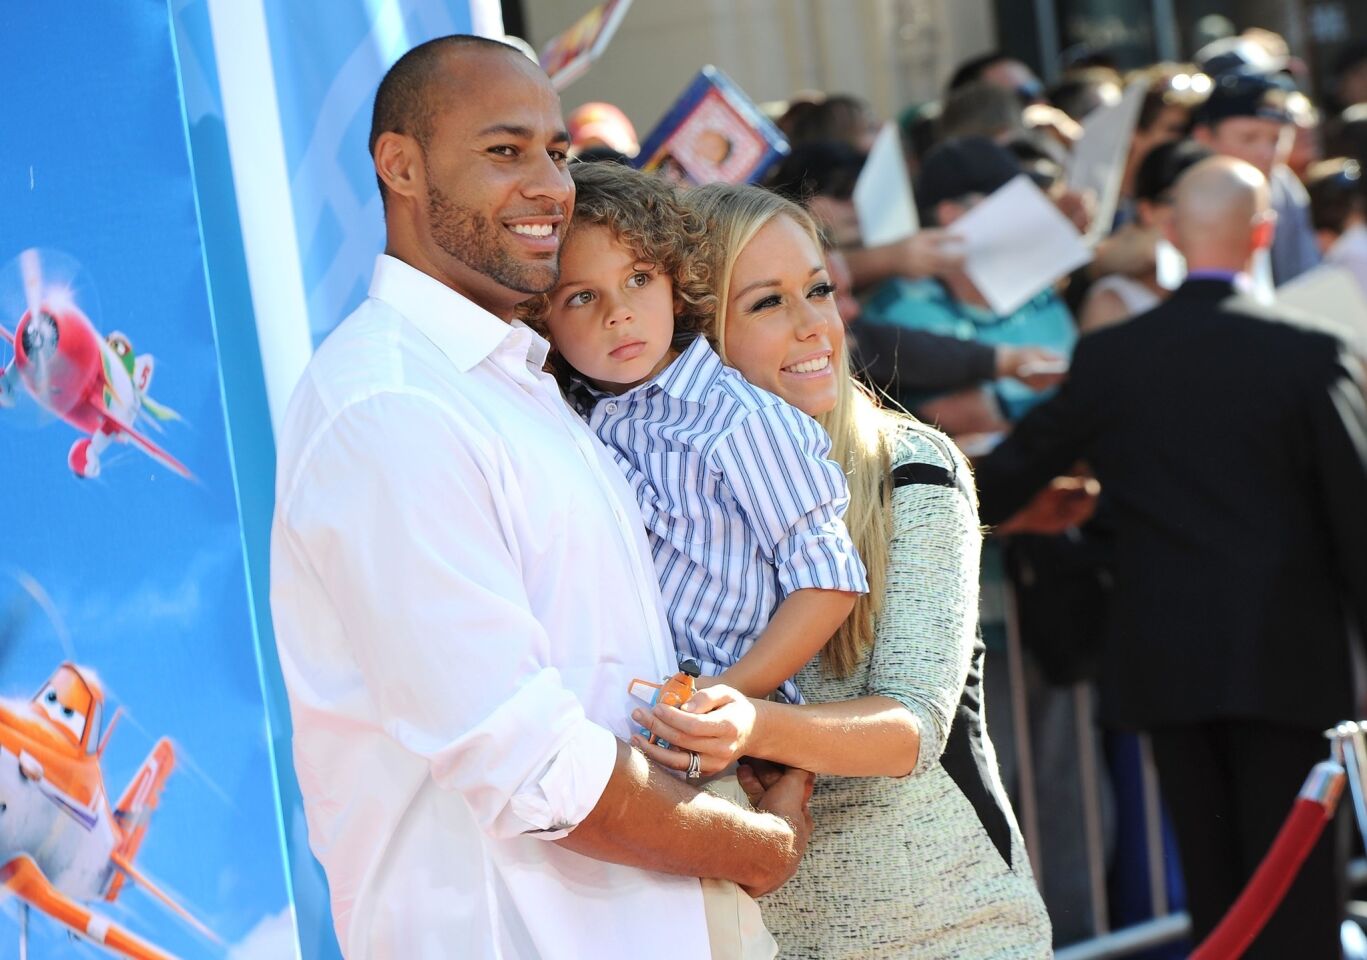 Kendra Wilkinson and former NFL player Hank Baskett are expecting another child. "We're at that point in our lives where everywhere we look, we're 100%," Wilkinson told HLN in September. "Now we know it's time to have another child. Last year, we were 50%, a couple of months ago we were 60%, and now we're 100%. We're really happy and that's the time to have a child -- when you're happy." The duo are already parents to Hank Baskett IV, pictured, who is almost 4 years old. They tied the knot in June 2009.